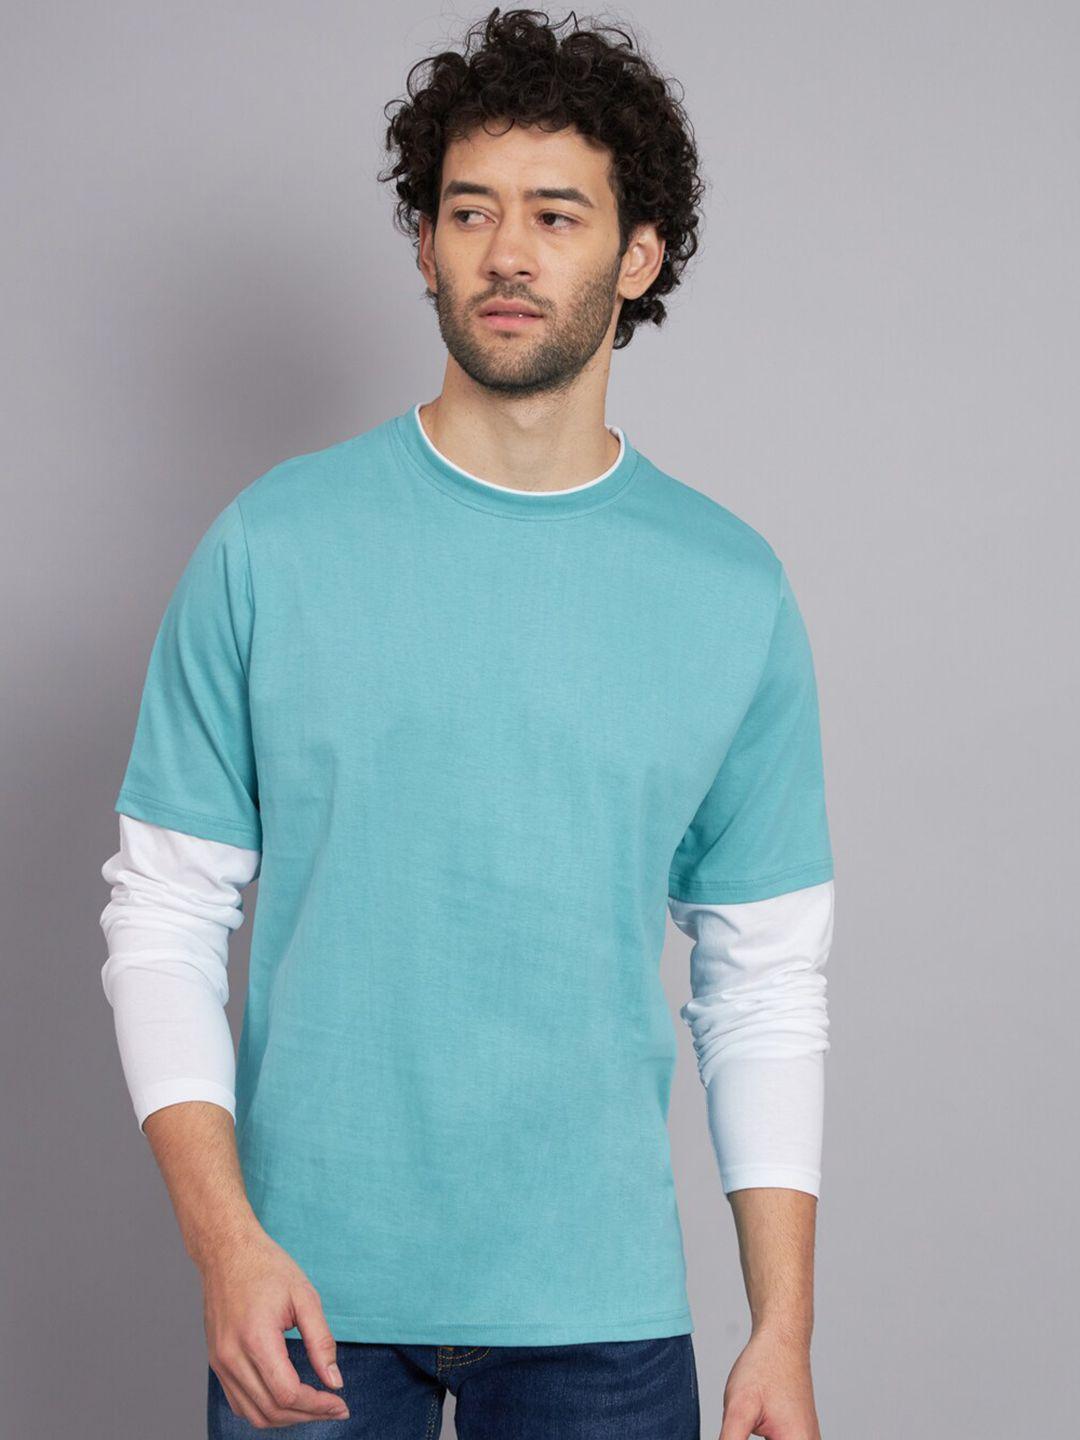 the dry state men turquoise blue & white full sleeves cotton t-shirt